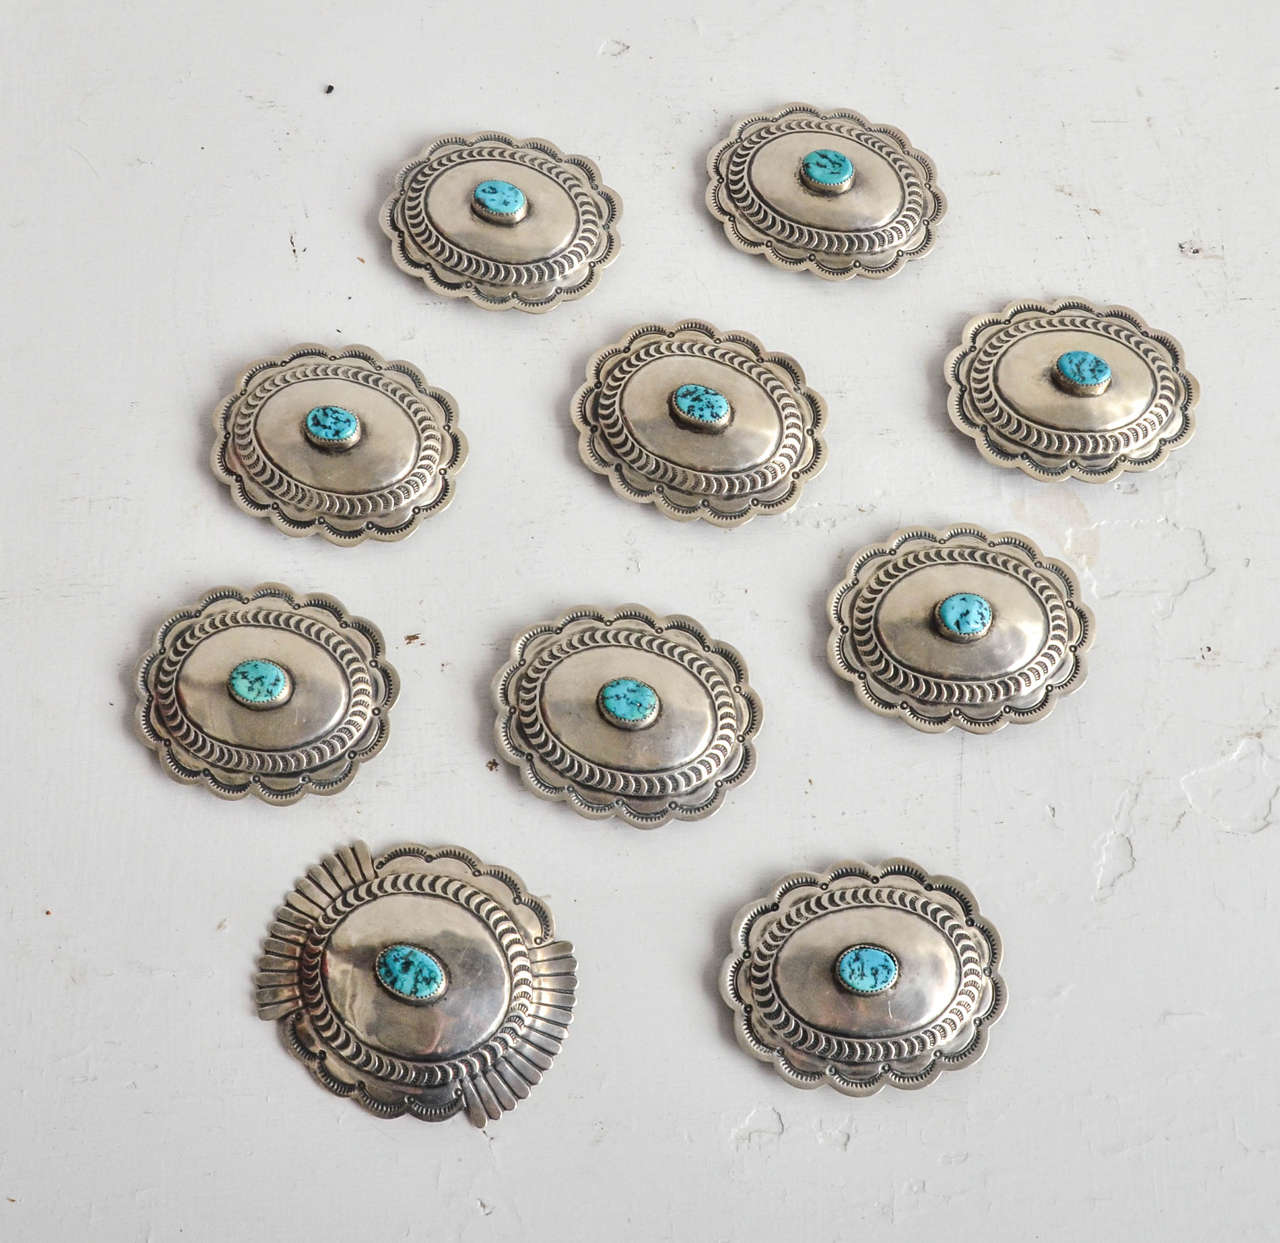 Ten silver and turquoise concho belt components. Native American. All pieces are the same, except for larger piece used as belt buckle. Measures: Pieces: 3 1/8" x 2 5/8"; buckle: 3 1/2" x 3".